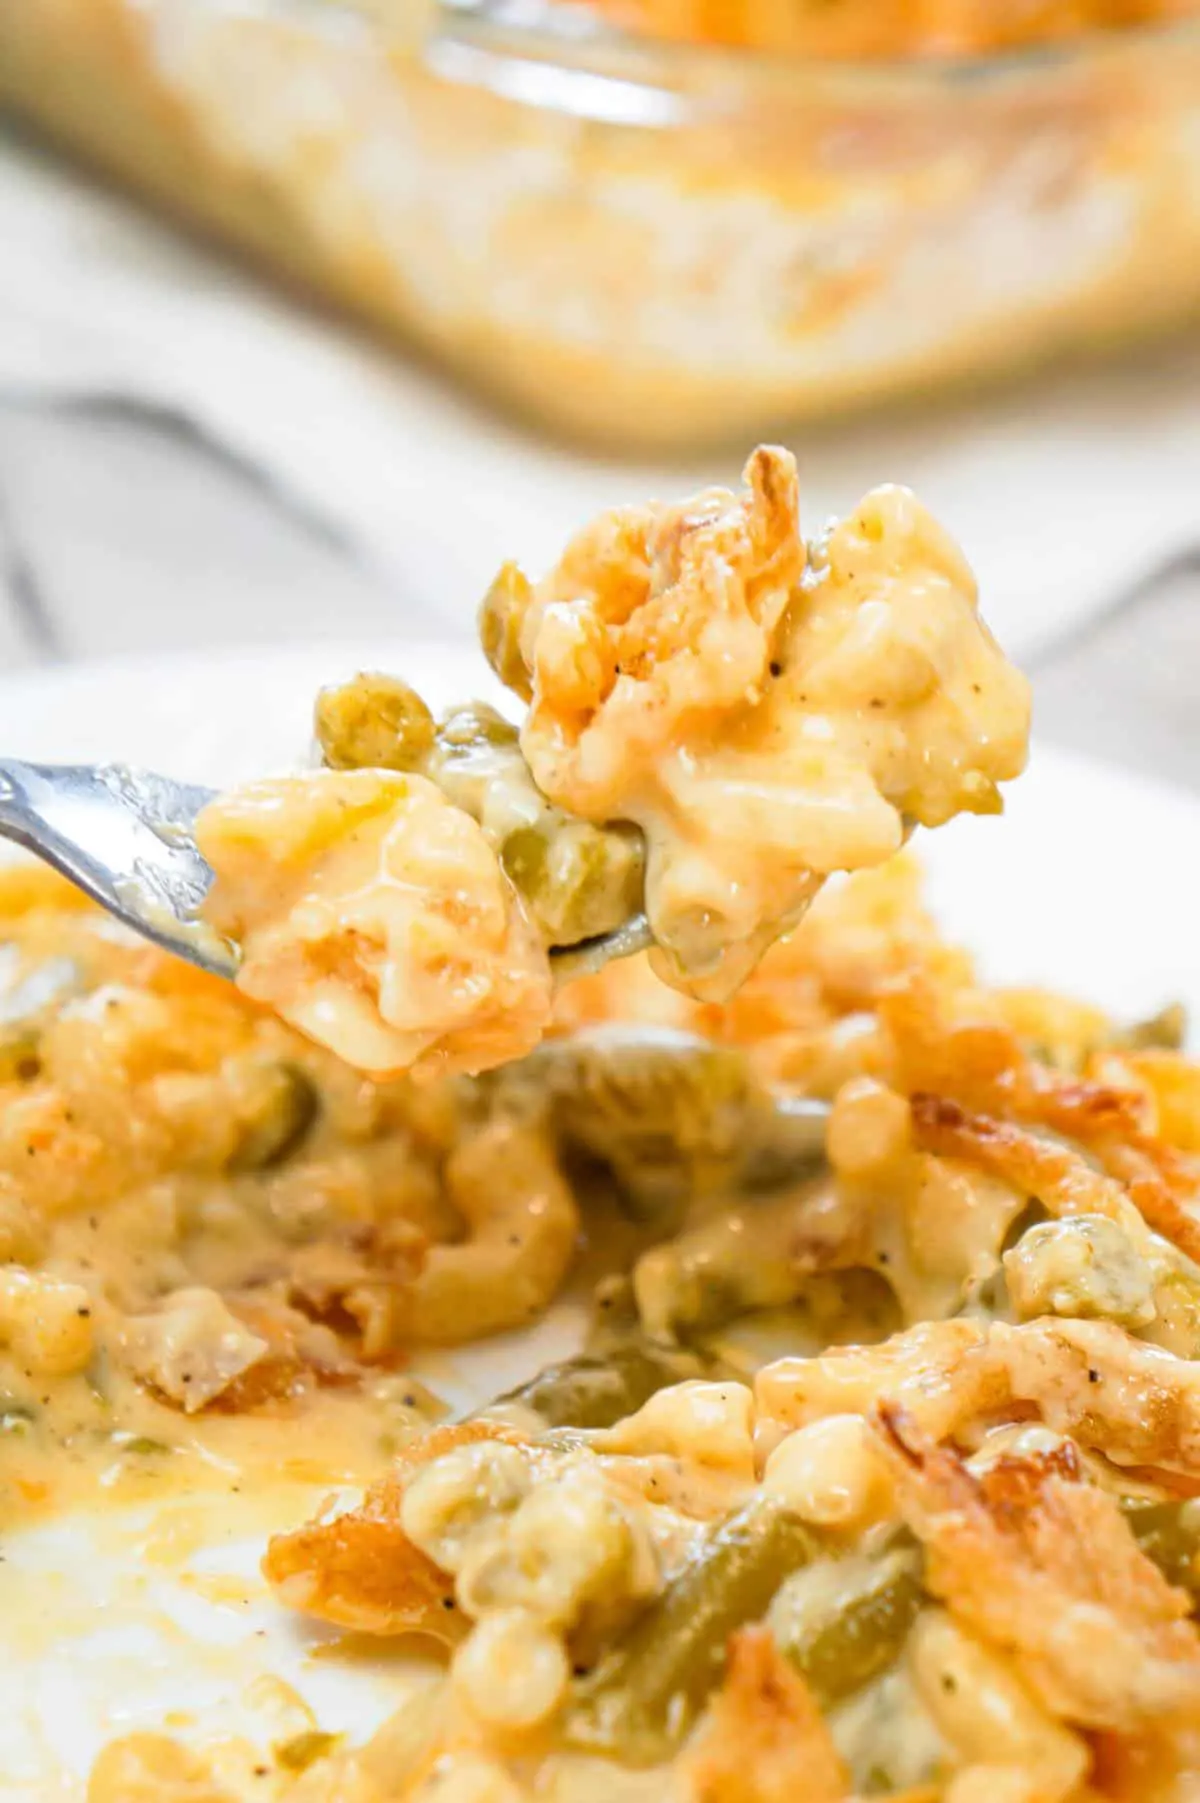 Mac and Cheese Green Bean Casserole is a tasty side dish recipe loaded with macaroni and green beans in a creamy cheese sauce, all topped with French's crispy fried onions!